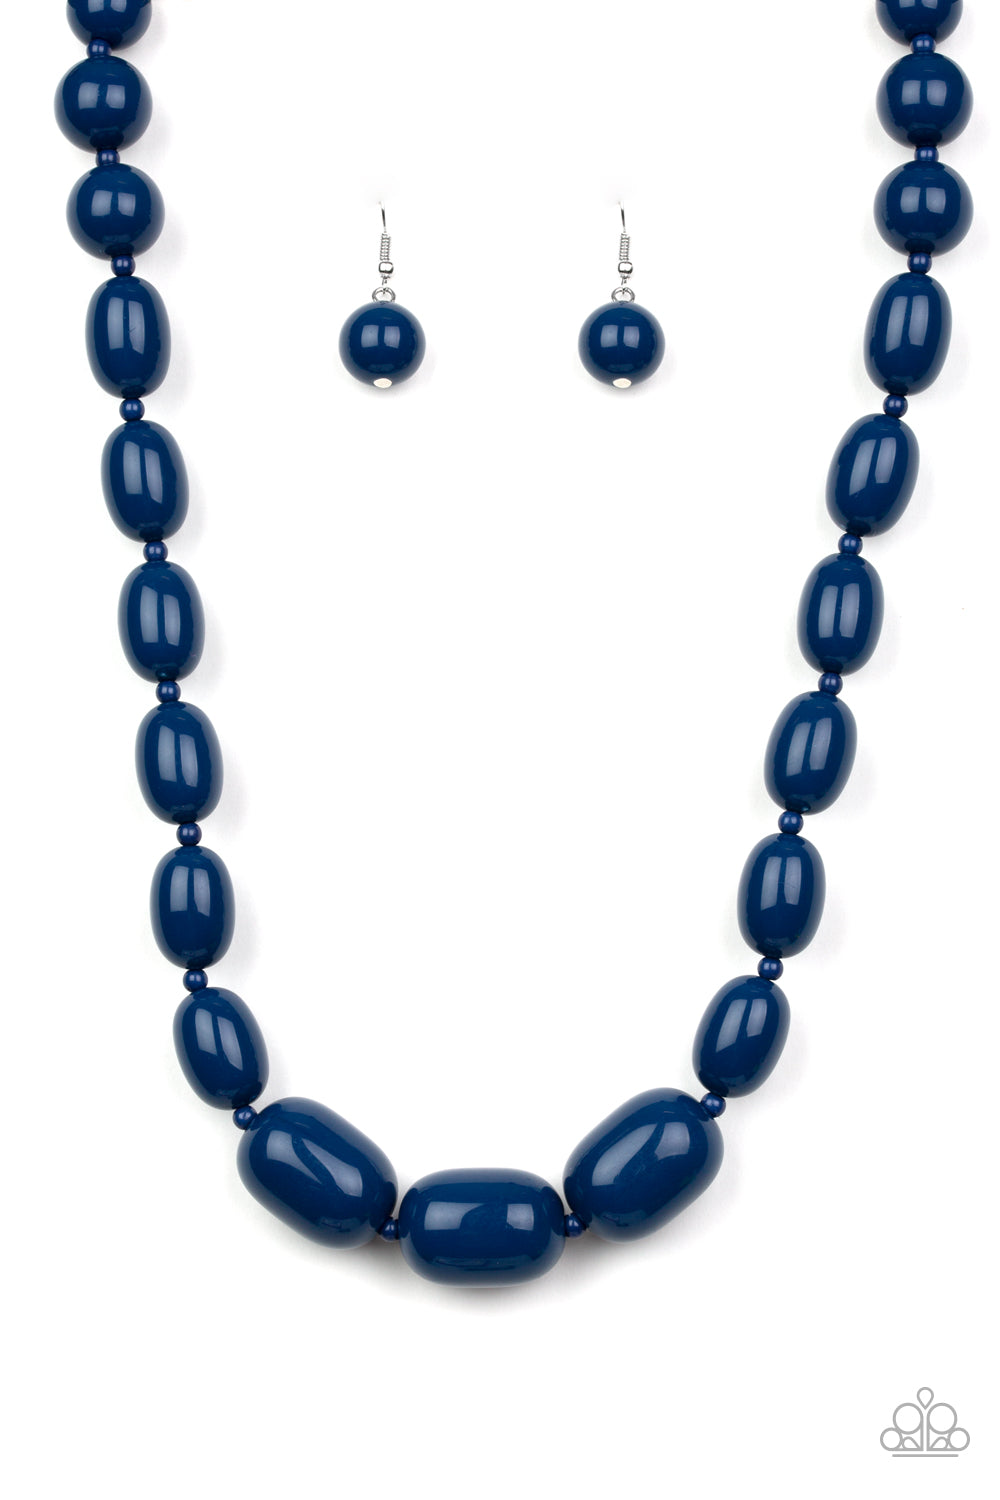 Poppin Popularity Necklace - Blue